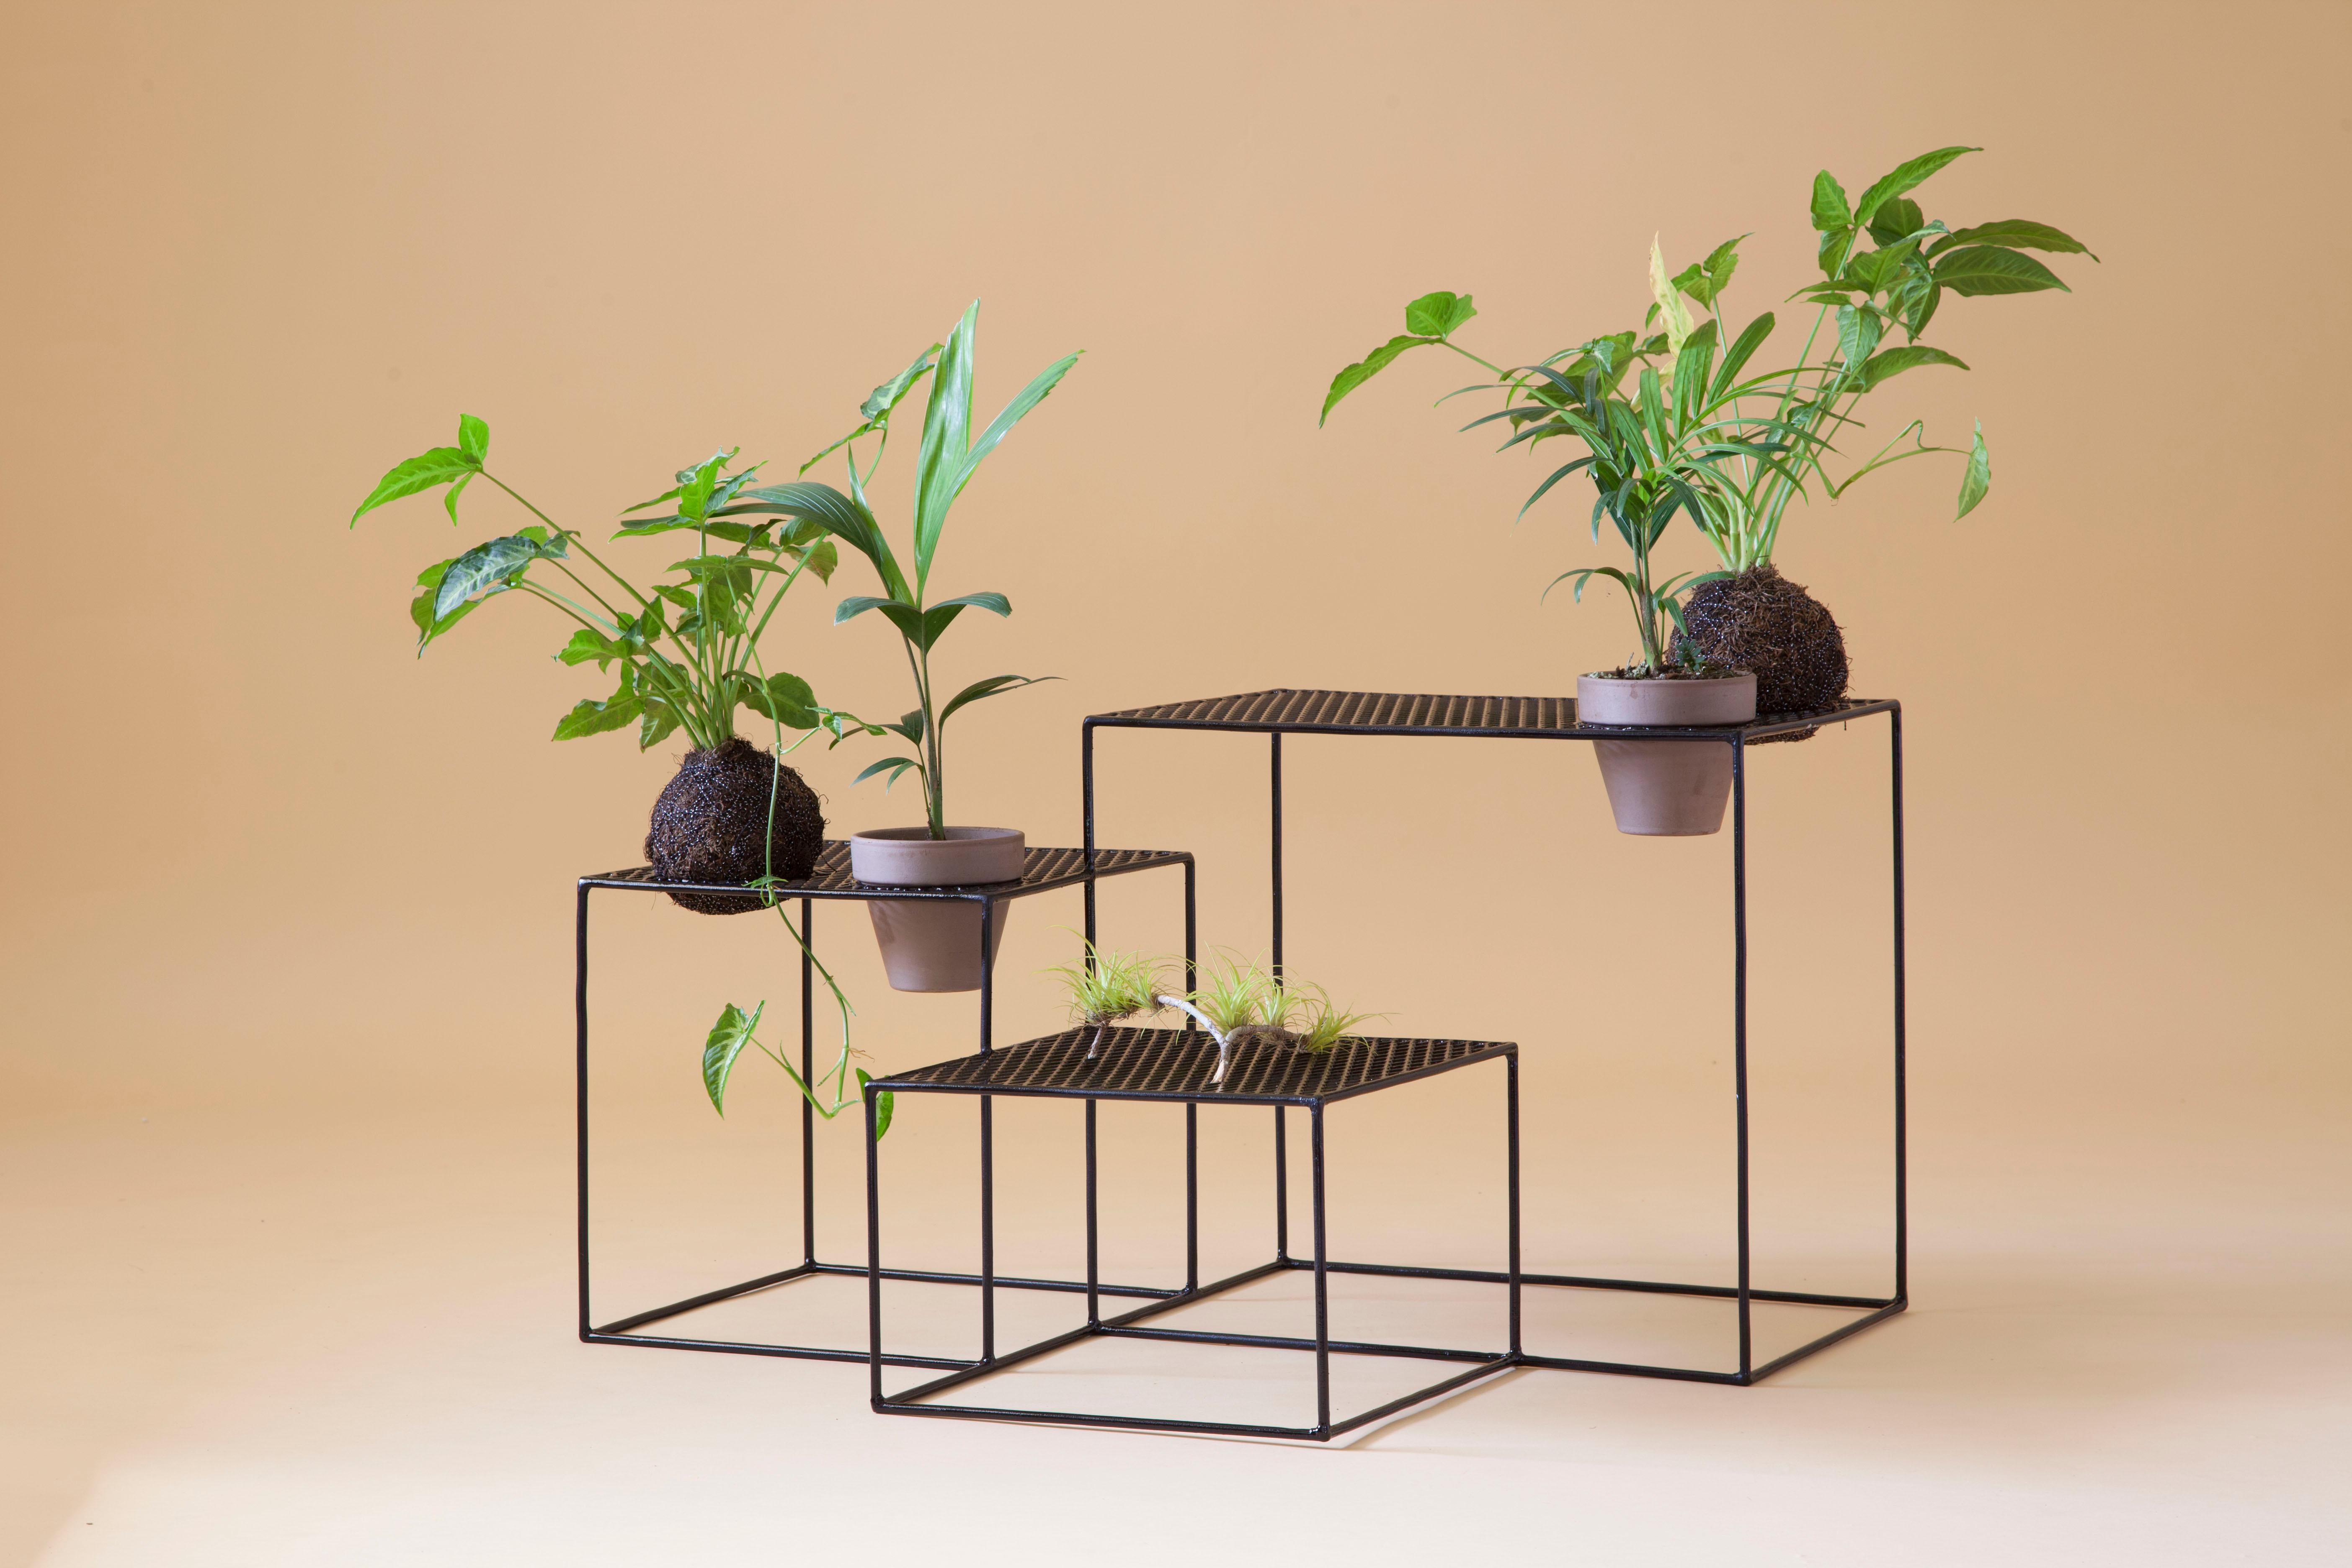 Aurea plant stand 4 by Sofia Alvarado
Limited edition 1 of 10
Materials: metal & woods / golden, white or black.
Dimensions: 40cm (H) x 75cm (W) x 60cm (D)

FI is an ornamental artist who embodies the creative Revelation of the sensitivity of